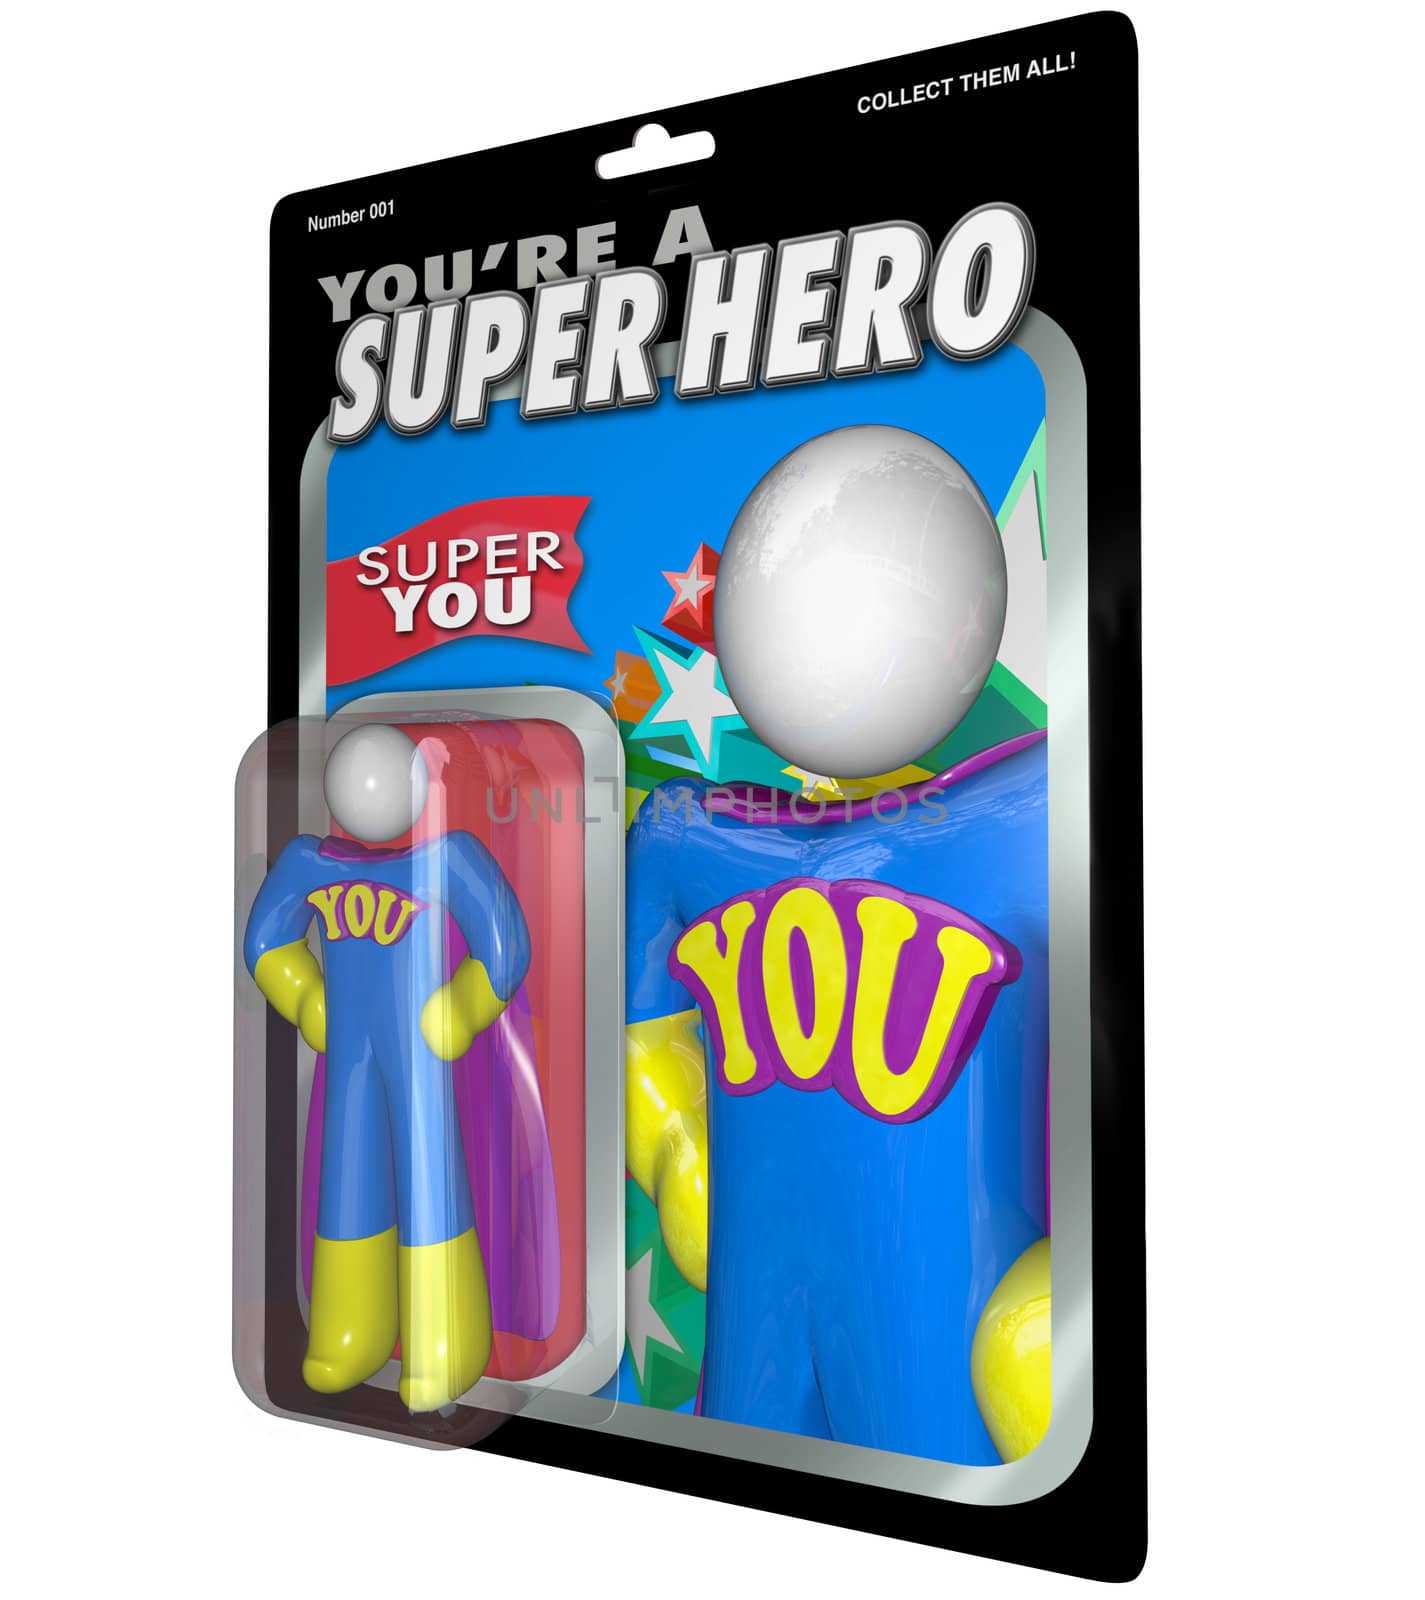 You Are a Super Hero Action Figure Praise Recognition by iQoncept